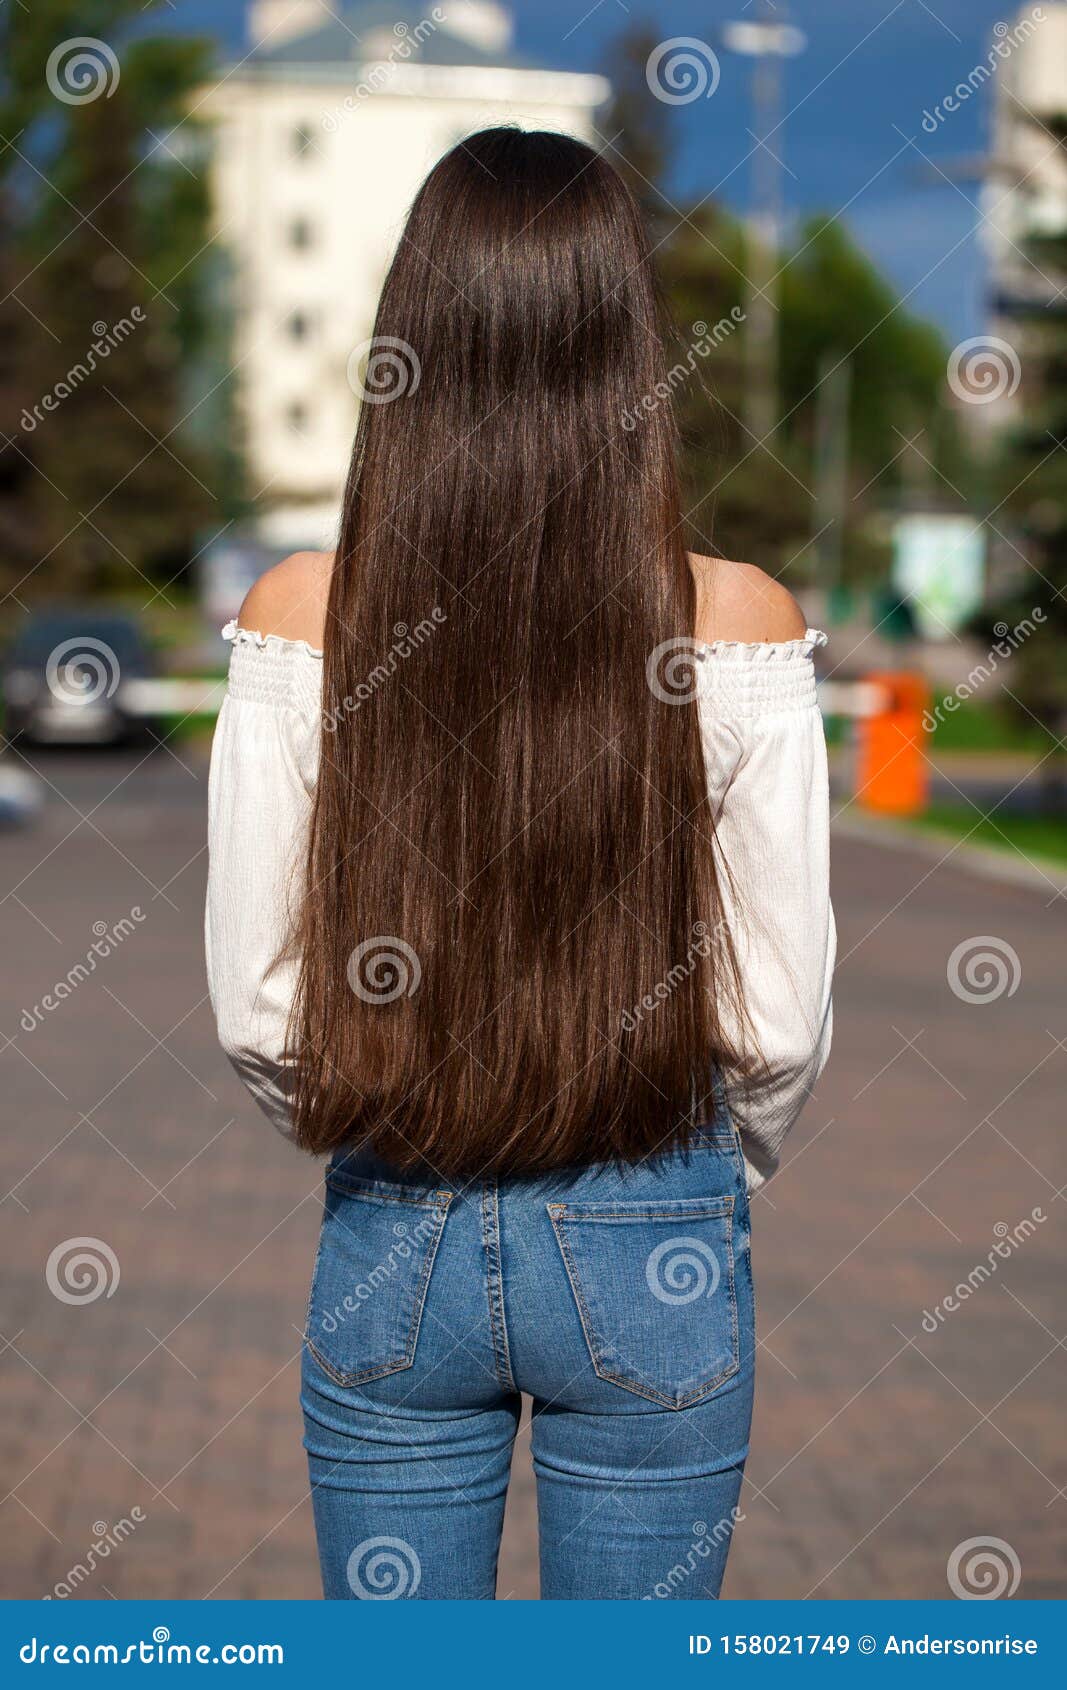 Back View Female Brunette Hair Stock Image - Image of hairstyle, female:  158021749